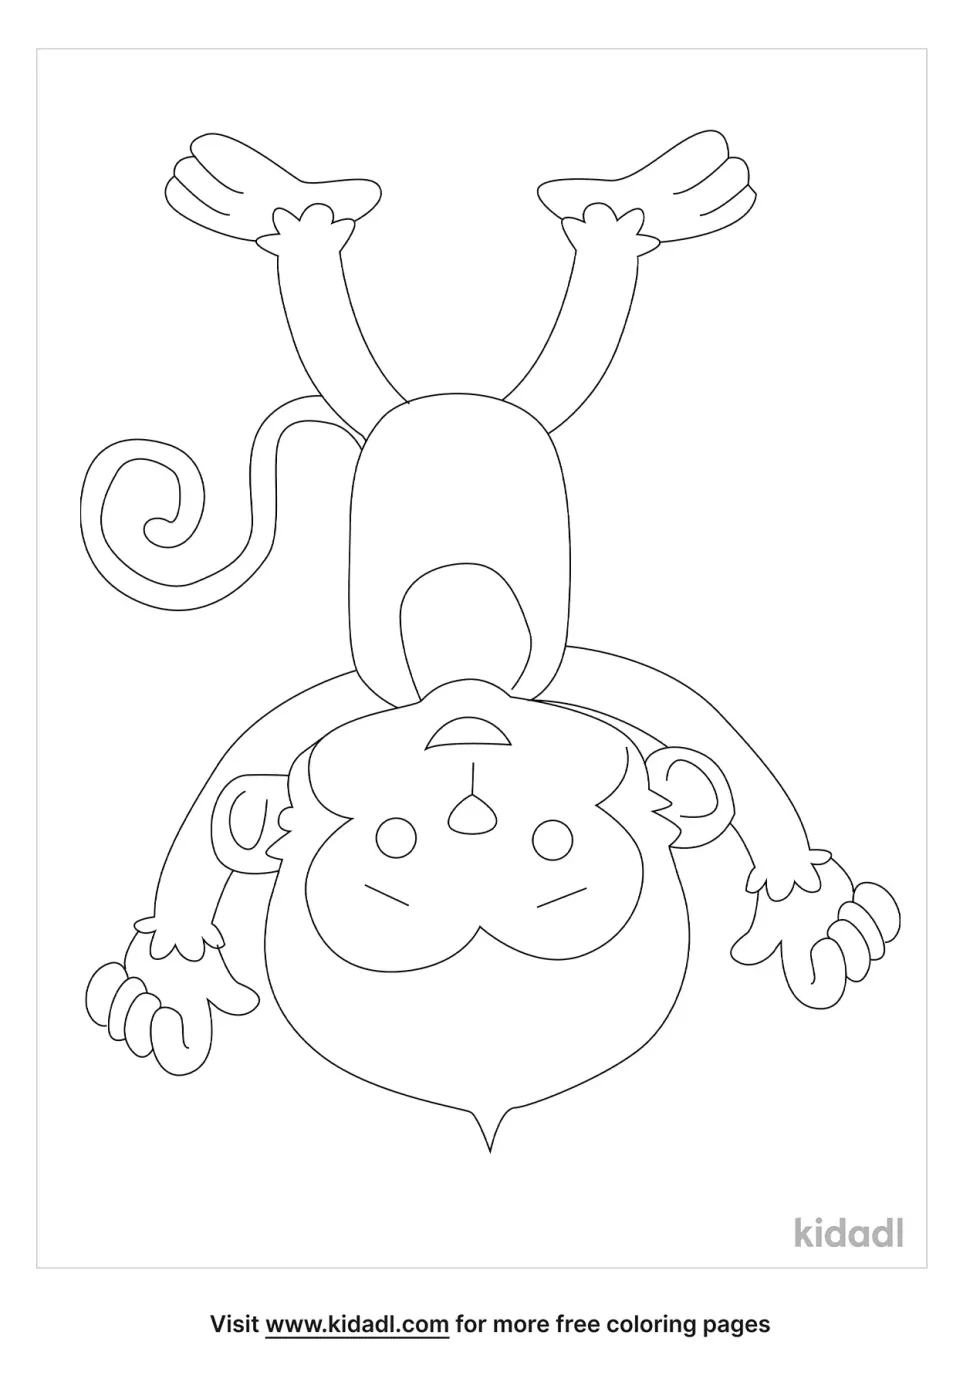 Little Monkey Upside Down Coloring Page